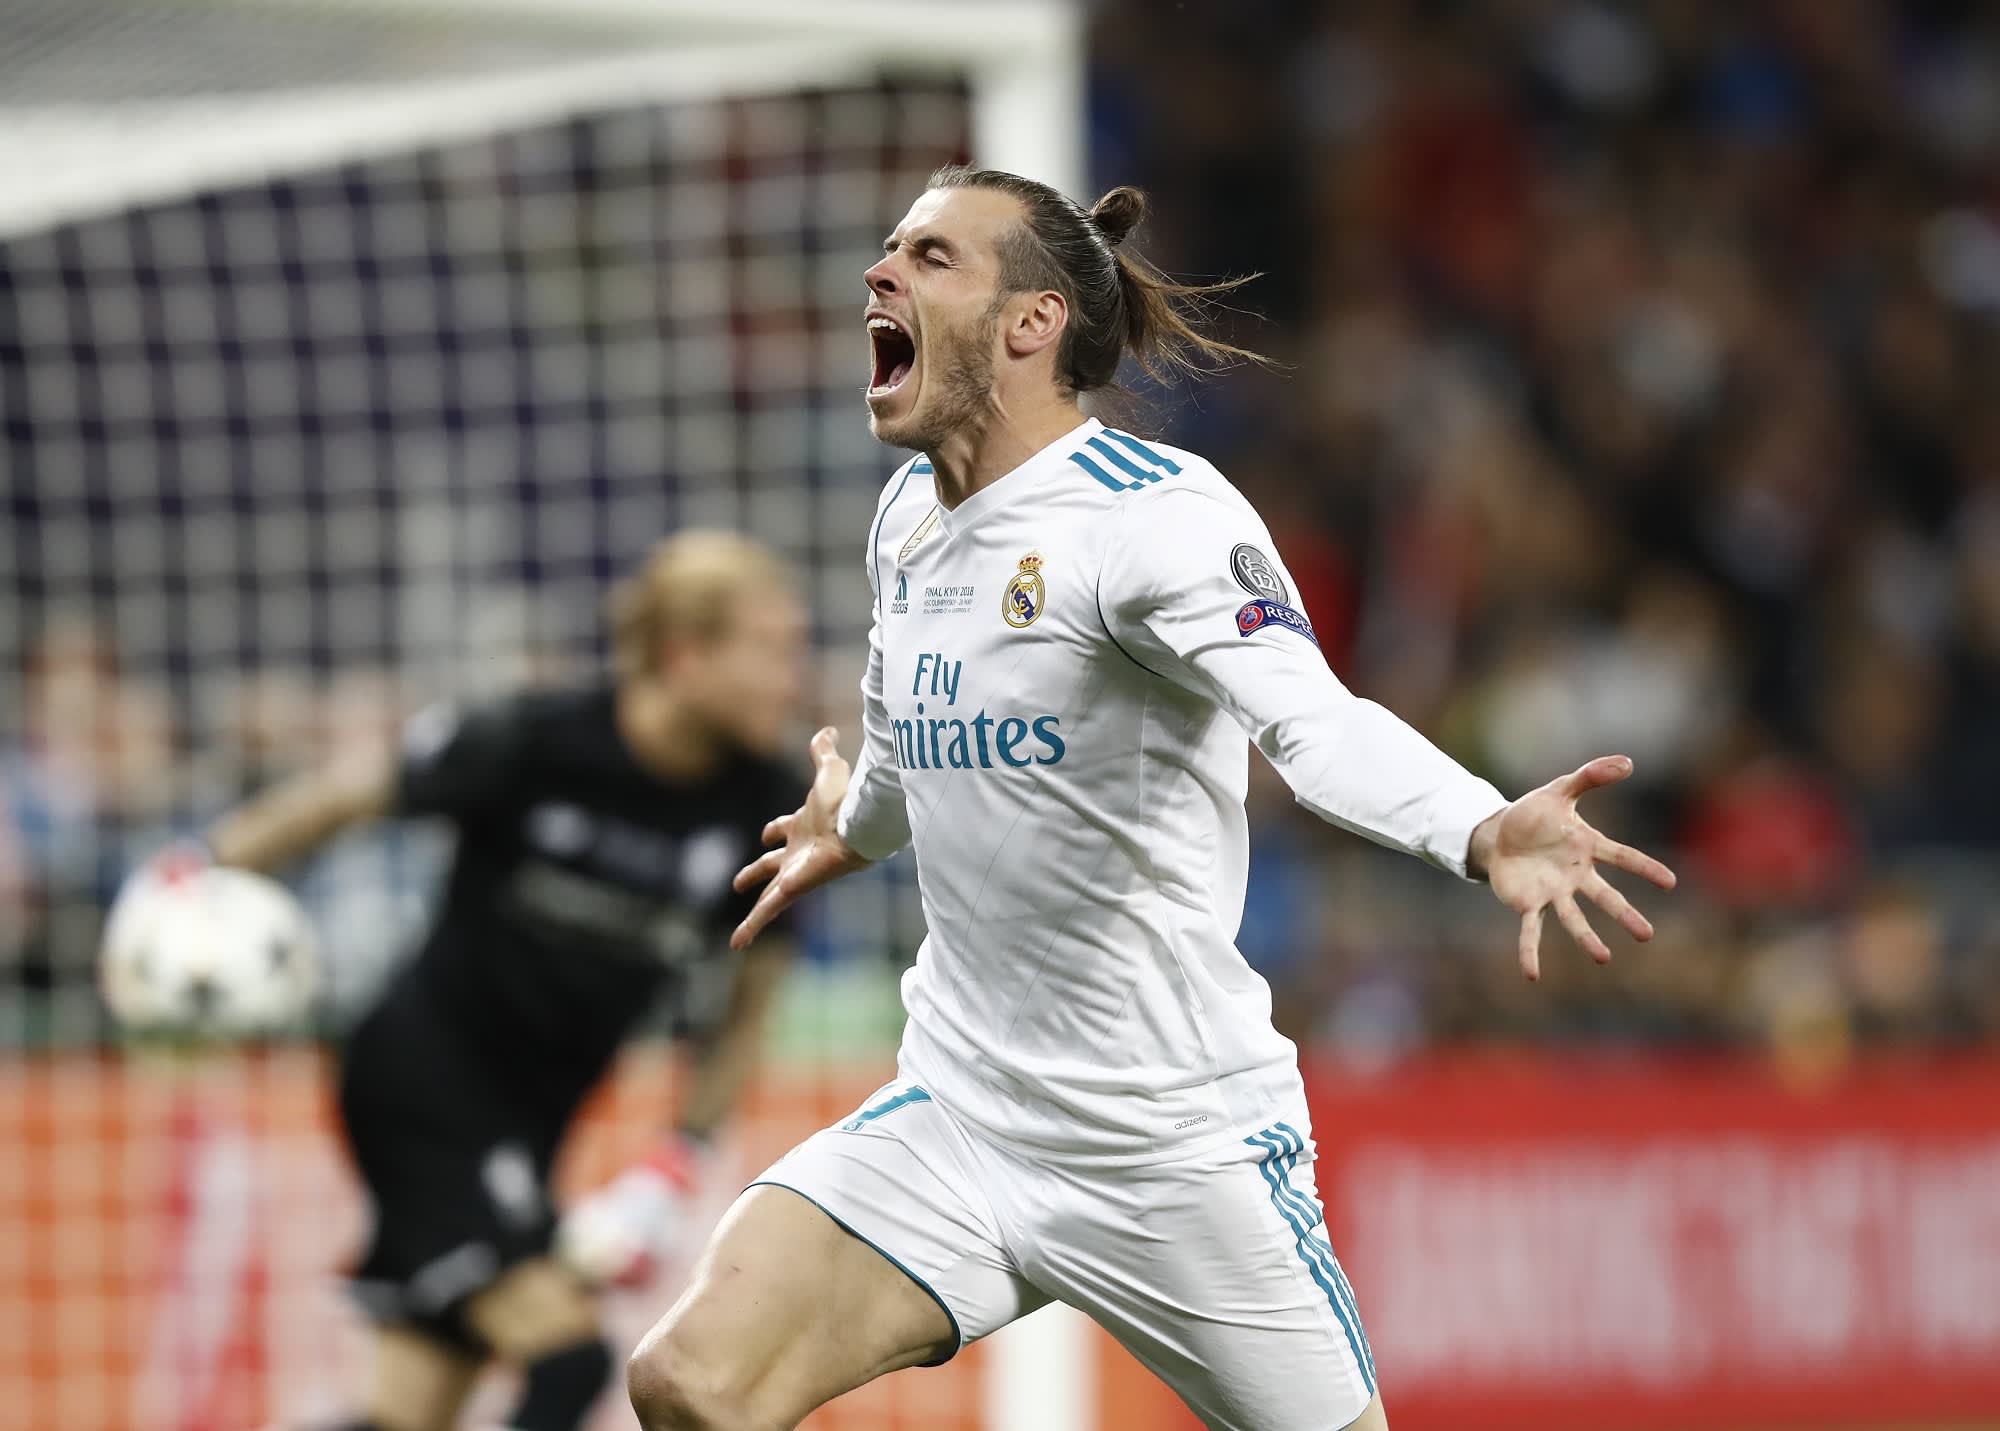 Adidas won't in sale of Gareth Bale from Real Madrid